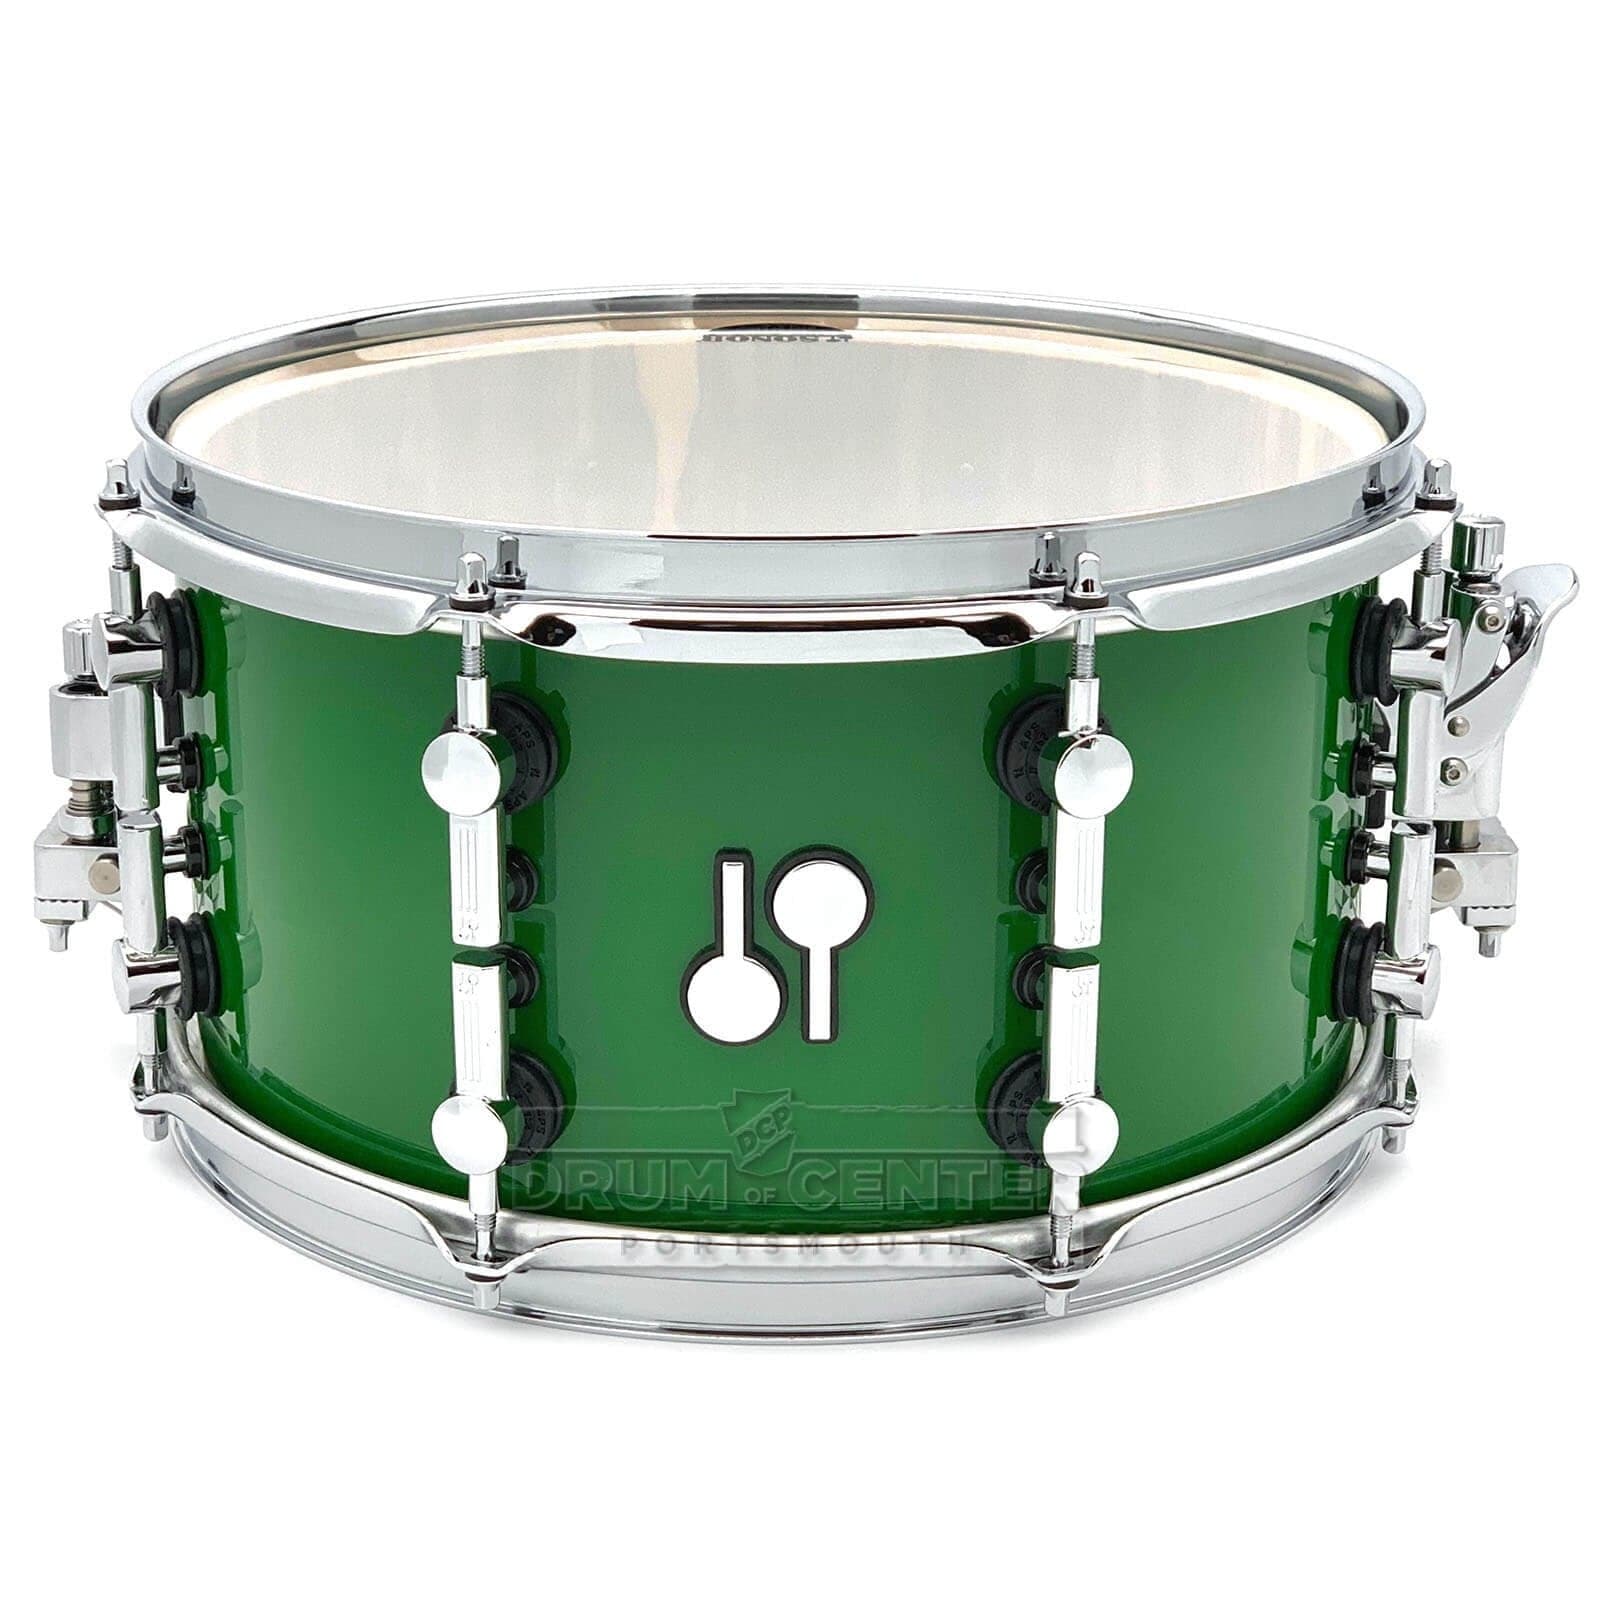 Sonor SQ2 Heavy Maple Snare Drum 13x7 Leaf Green – Drum Center Of